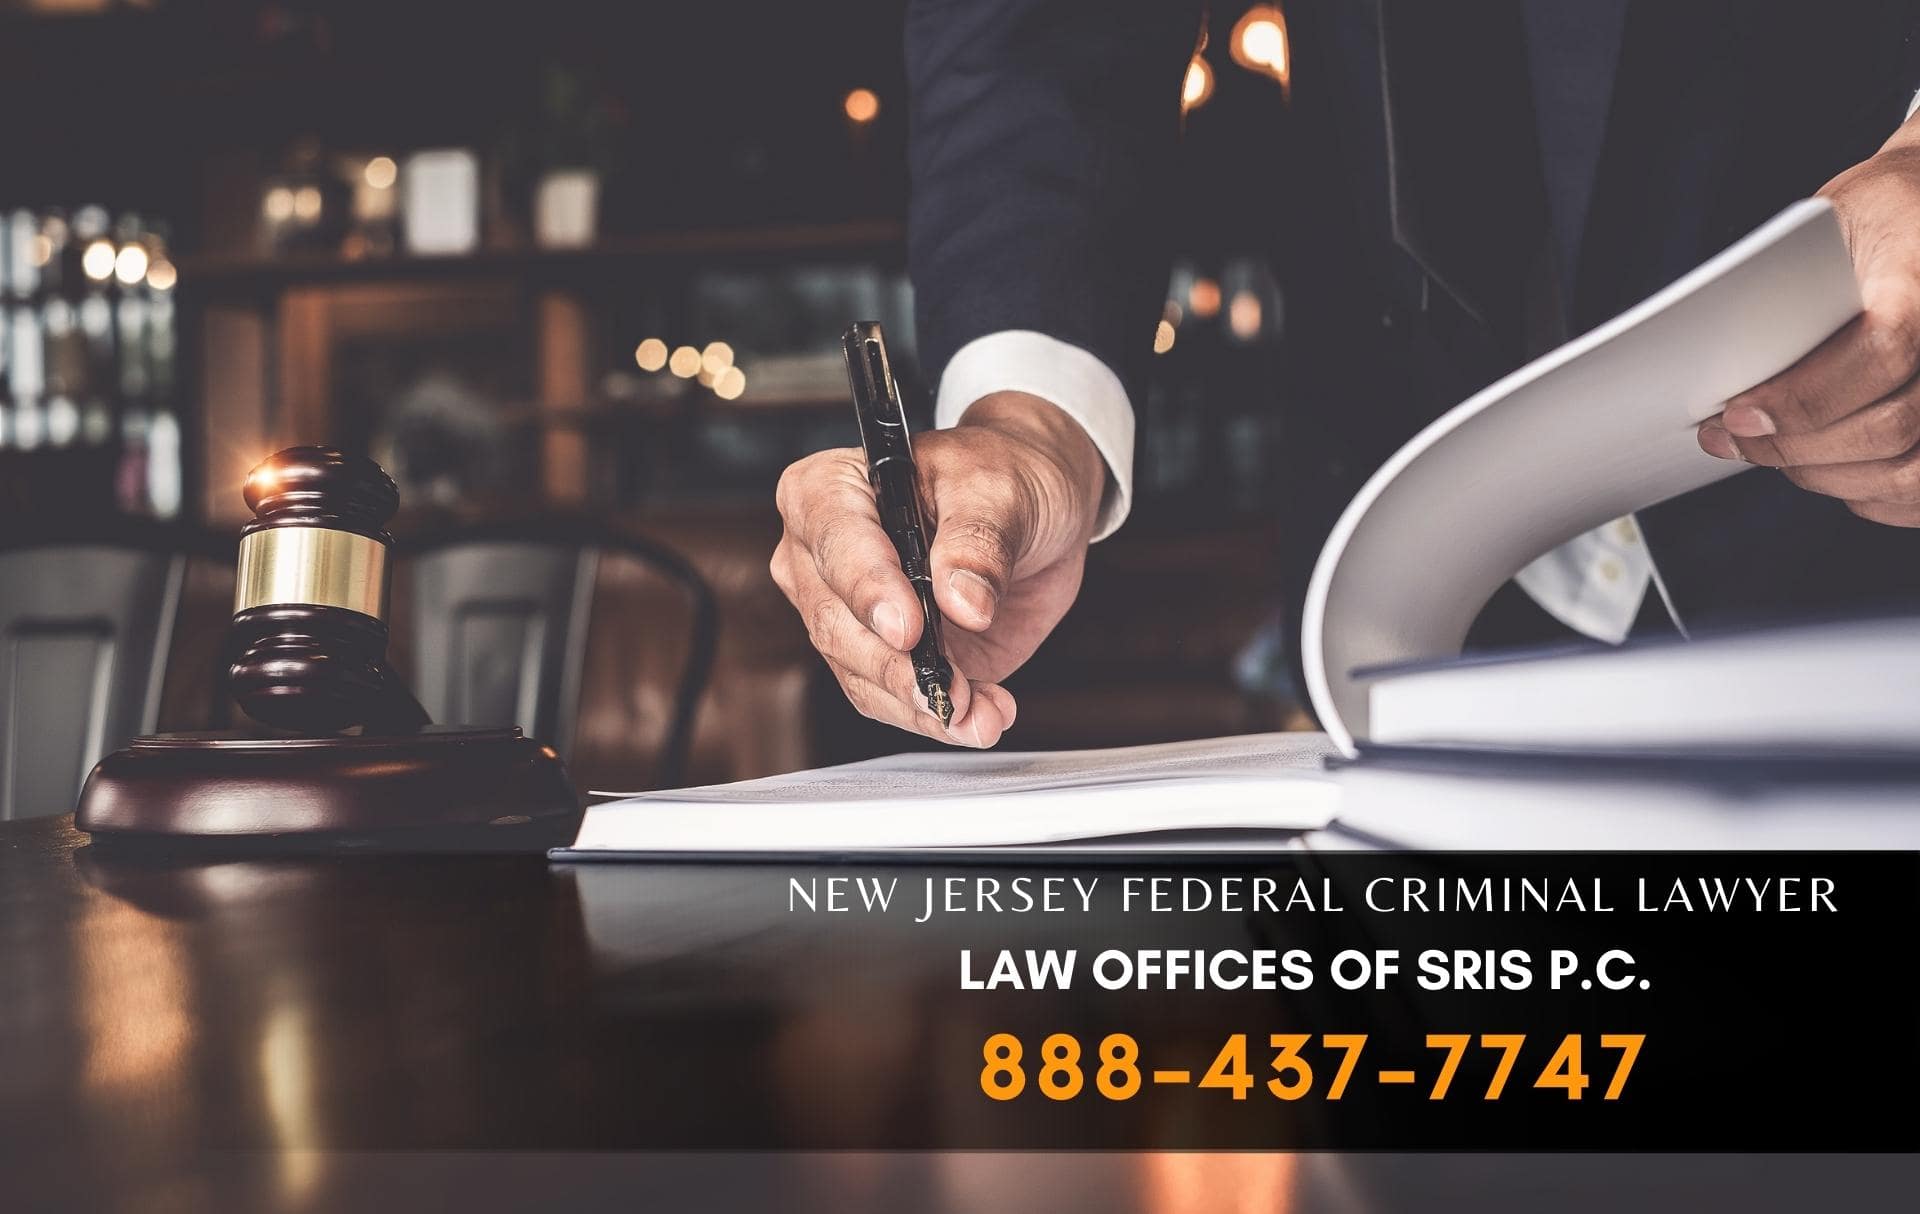 New Jersey Federal Criminal Lawyer